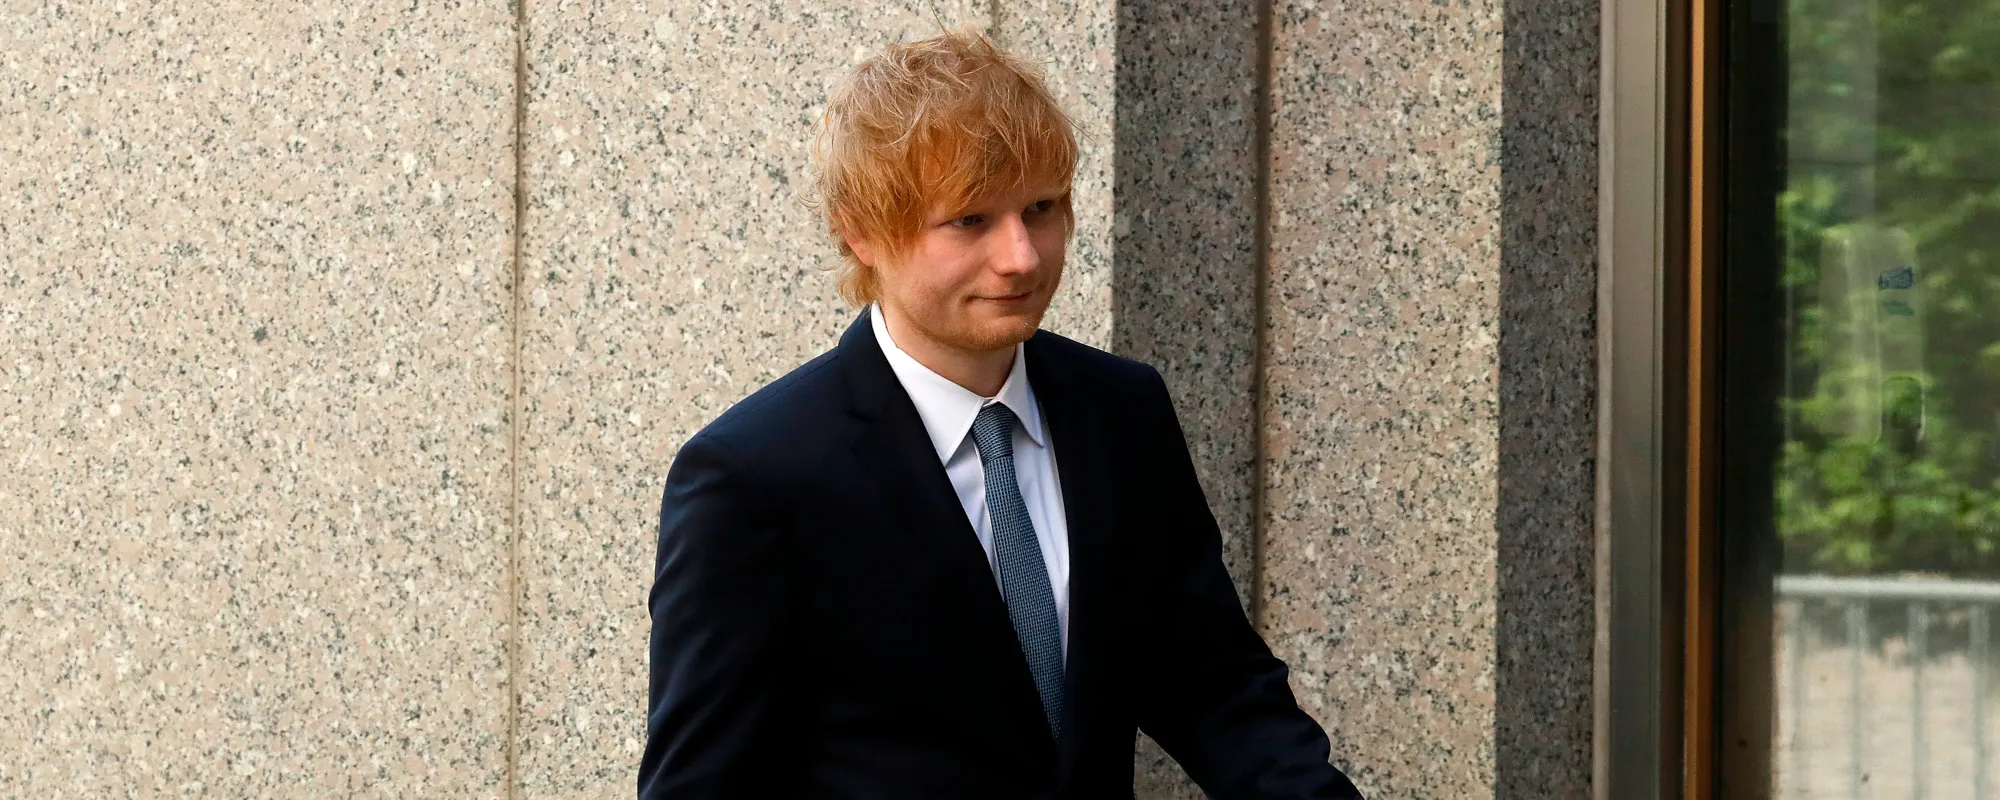 Ed Sheeran Performs “Thinking Out Loud” During Marvin Gaye Copyright Trial